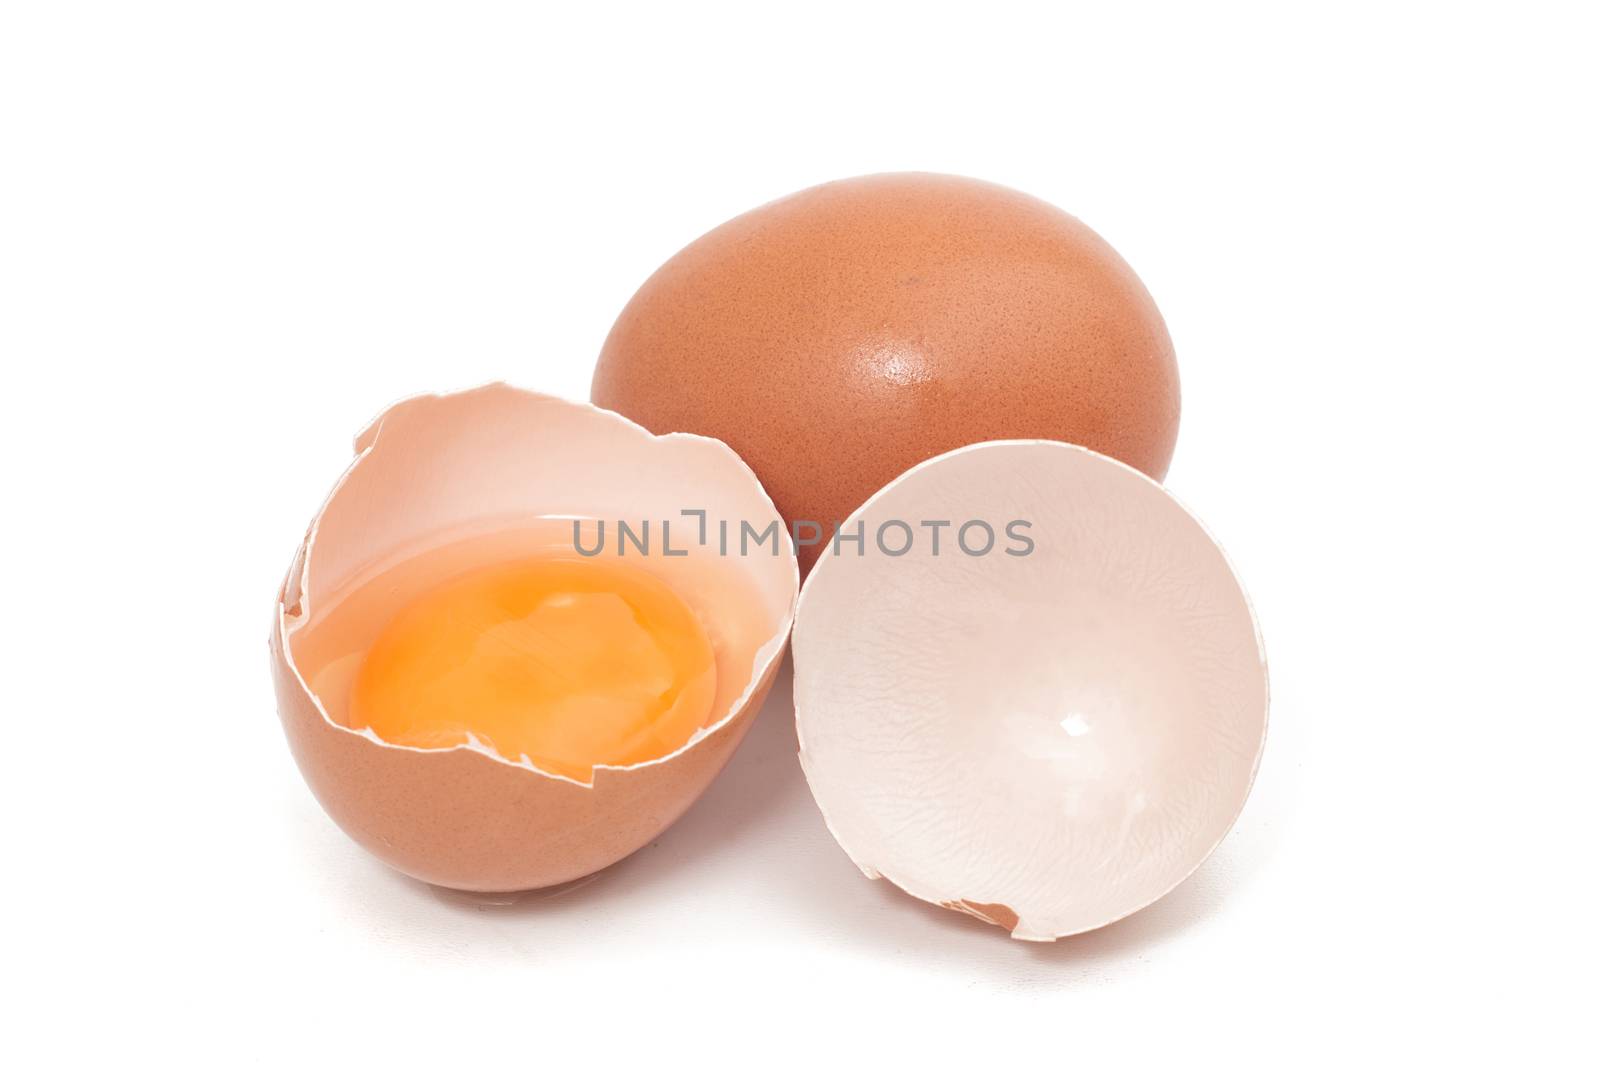 cracked egg with yolk isolated on a white background.